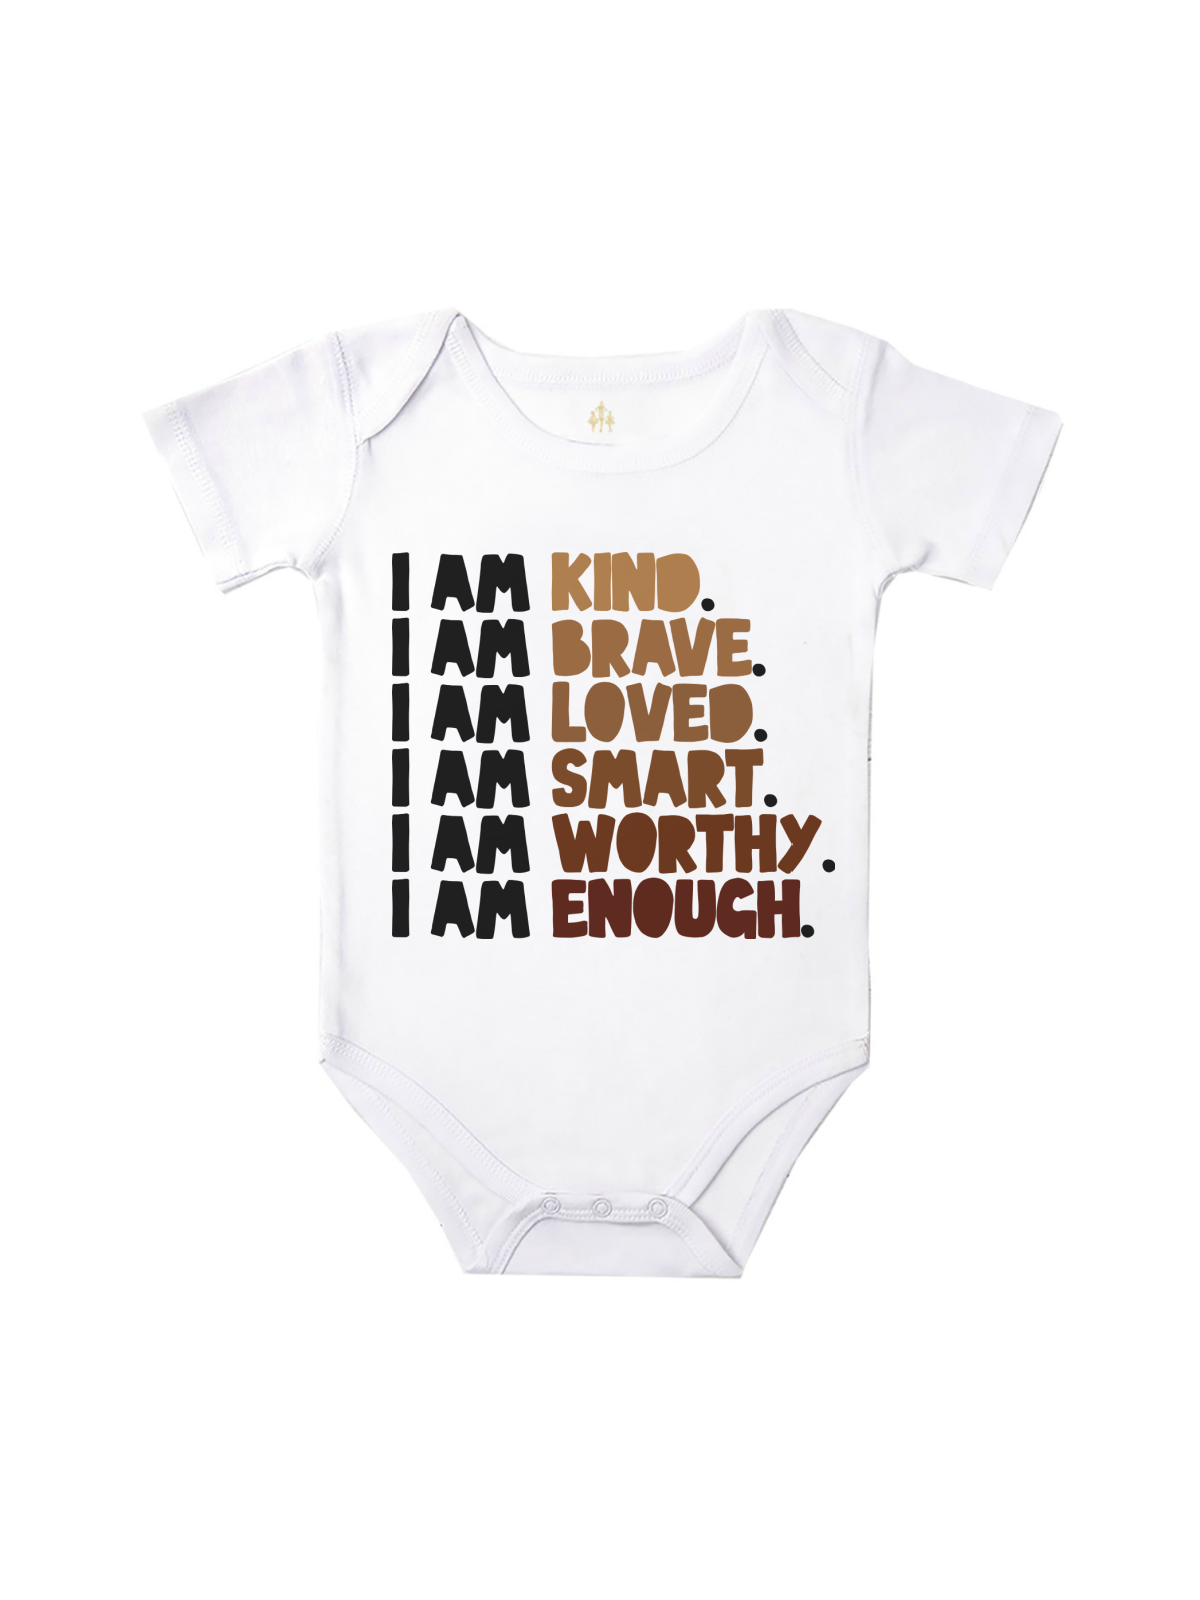 Baby Positive Affirmations Bodysuit in WhiteI Am Affirmations for Baby Bodysuit